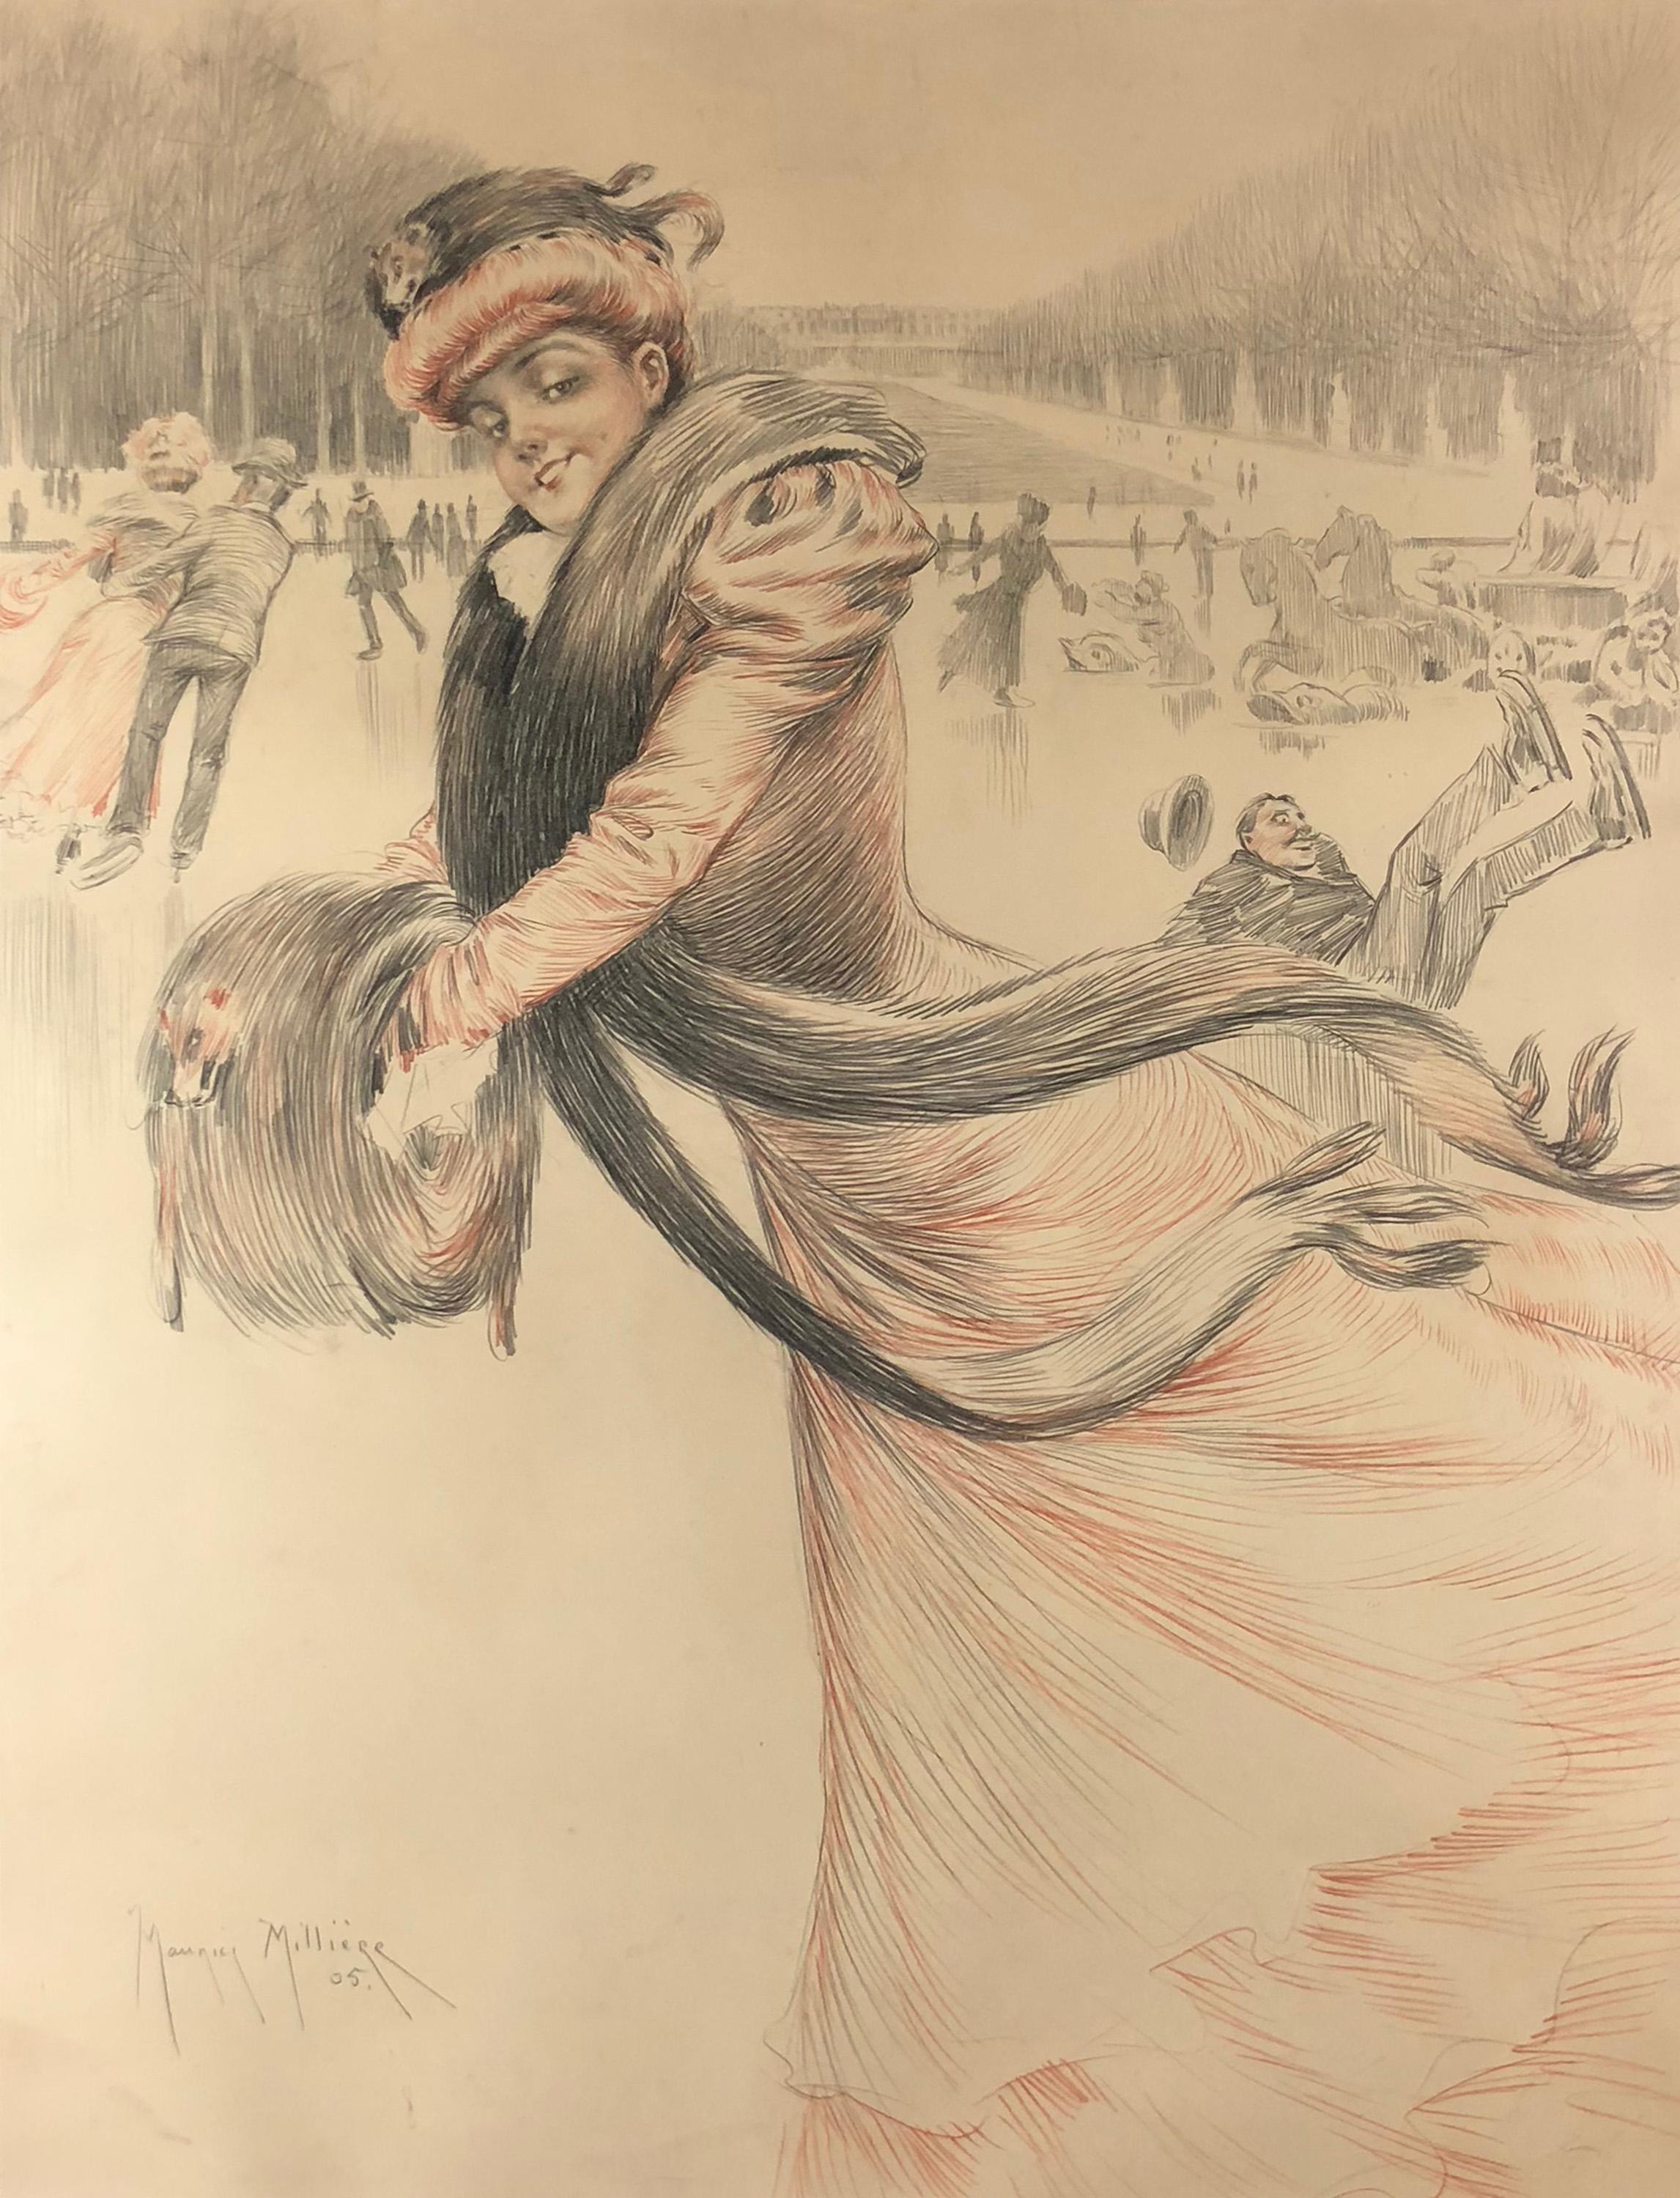 A Skating Beauty - Art by Maurice Milliere